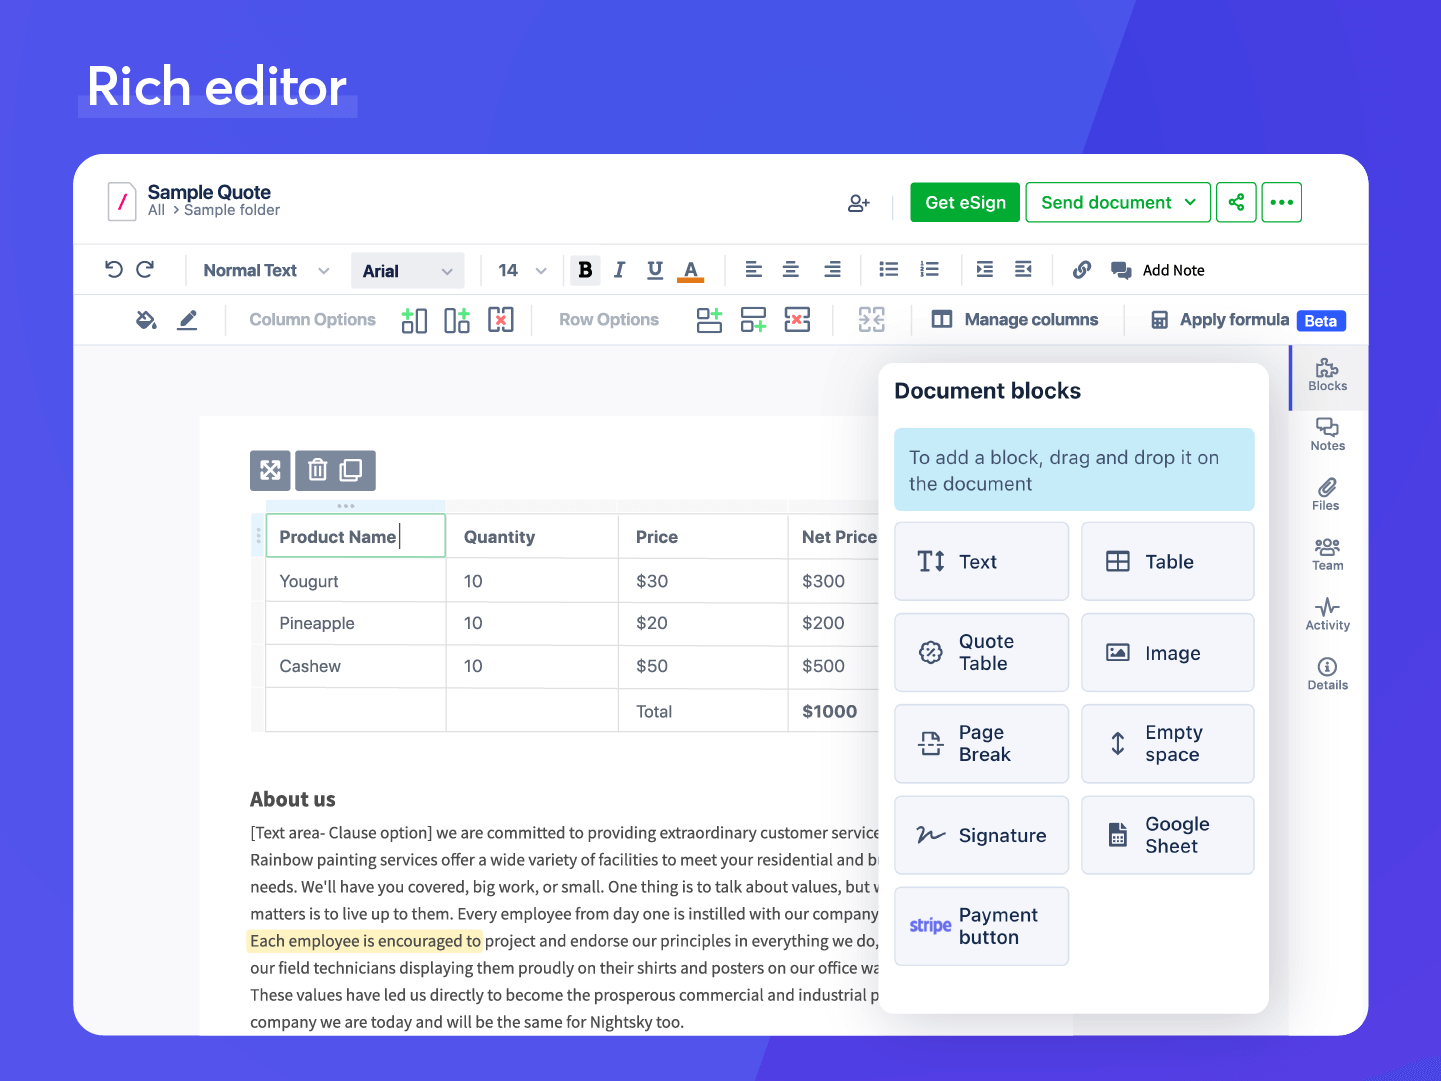 RICH EDITOR - Creating professional-looking documents is easy with the drag & drop editor. Add text, images, tables, page breaks, signature blocks, and more. Personalize further with rich formatting options, customizable cover page themes, & backgrounds.